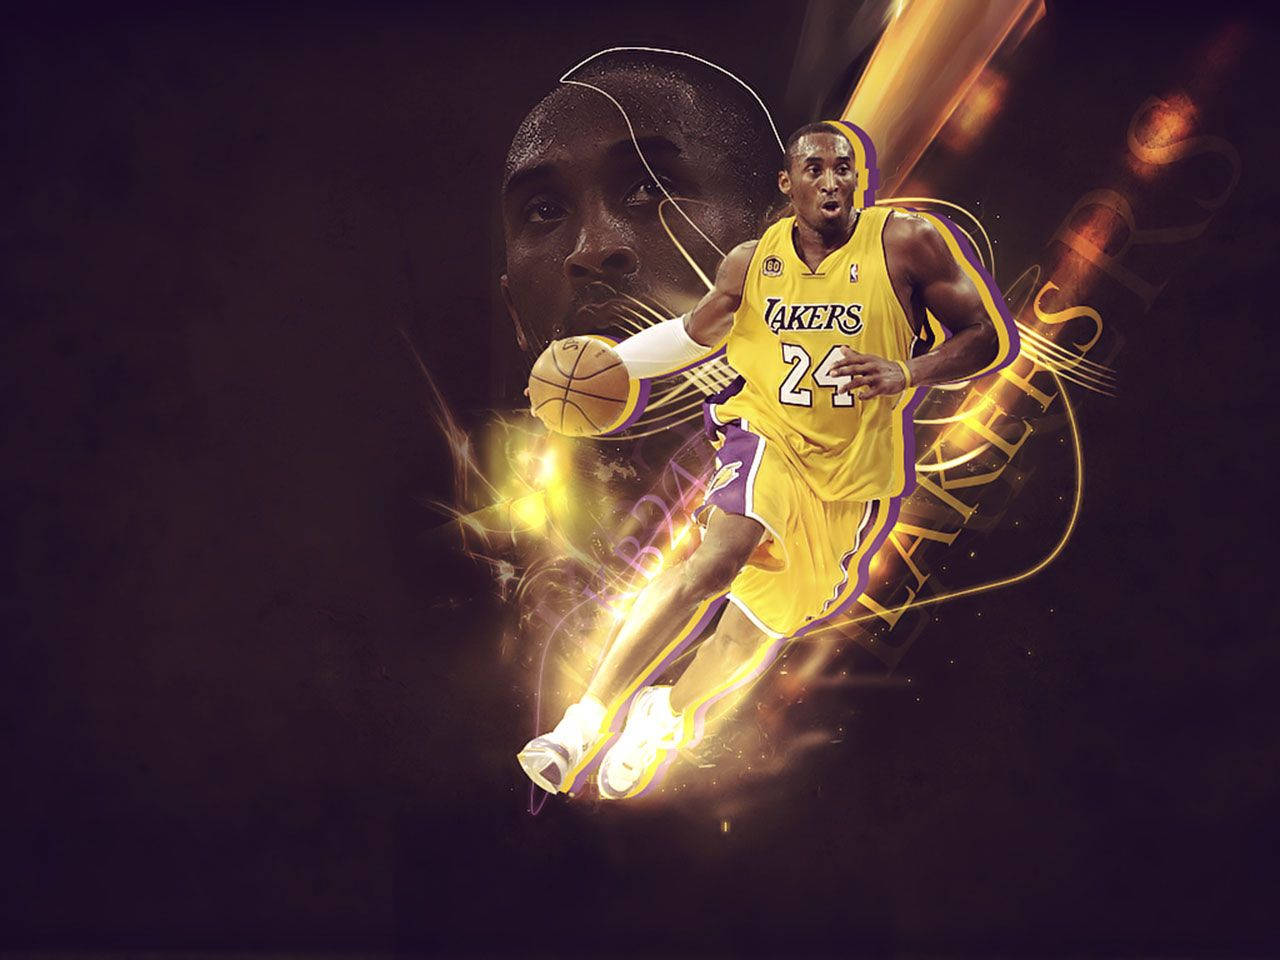 Kobe Bryant inspires us all with his endless passion and determination Wallpaper